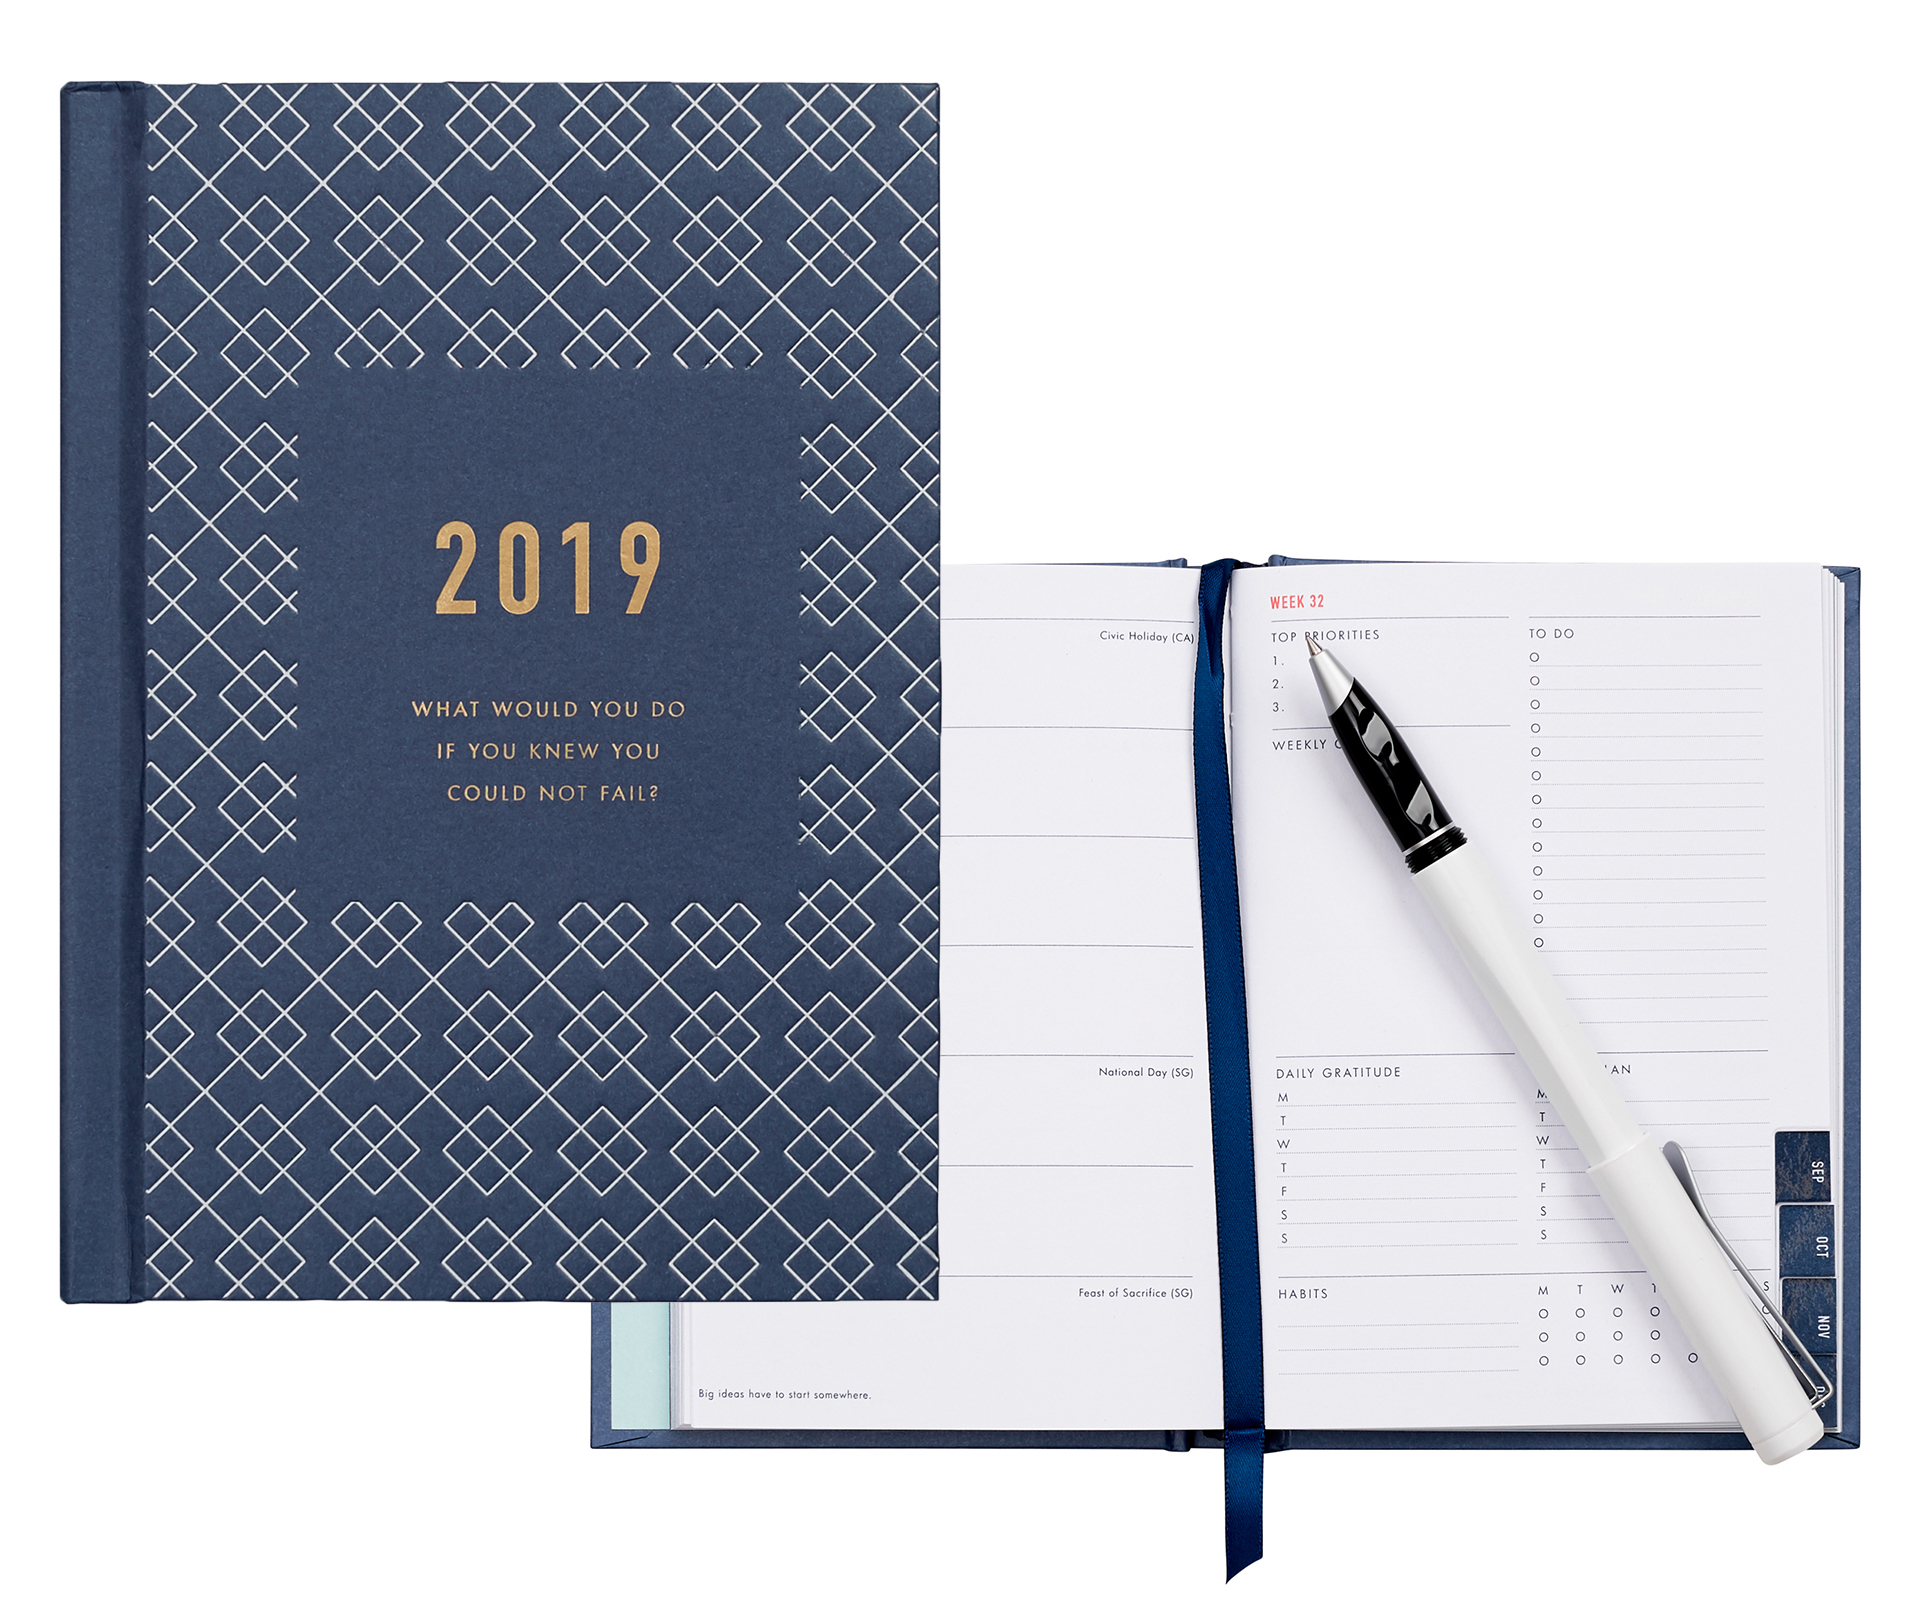 2019 A6 weekly diary This Kikki. K weekly diary will inspire you to embrace your dreams and goals. Featuring refection pages, inspiring quotes and tips for effective goal setting as well as monthly and weekly layouts. $27.93 from Kikki.K.